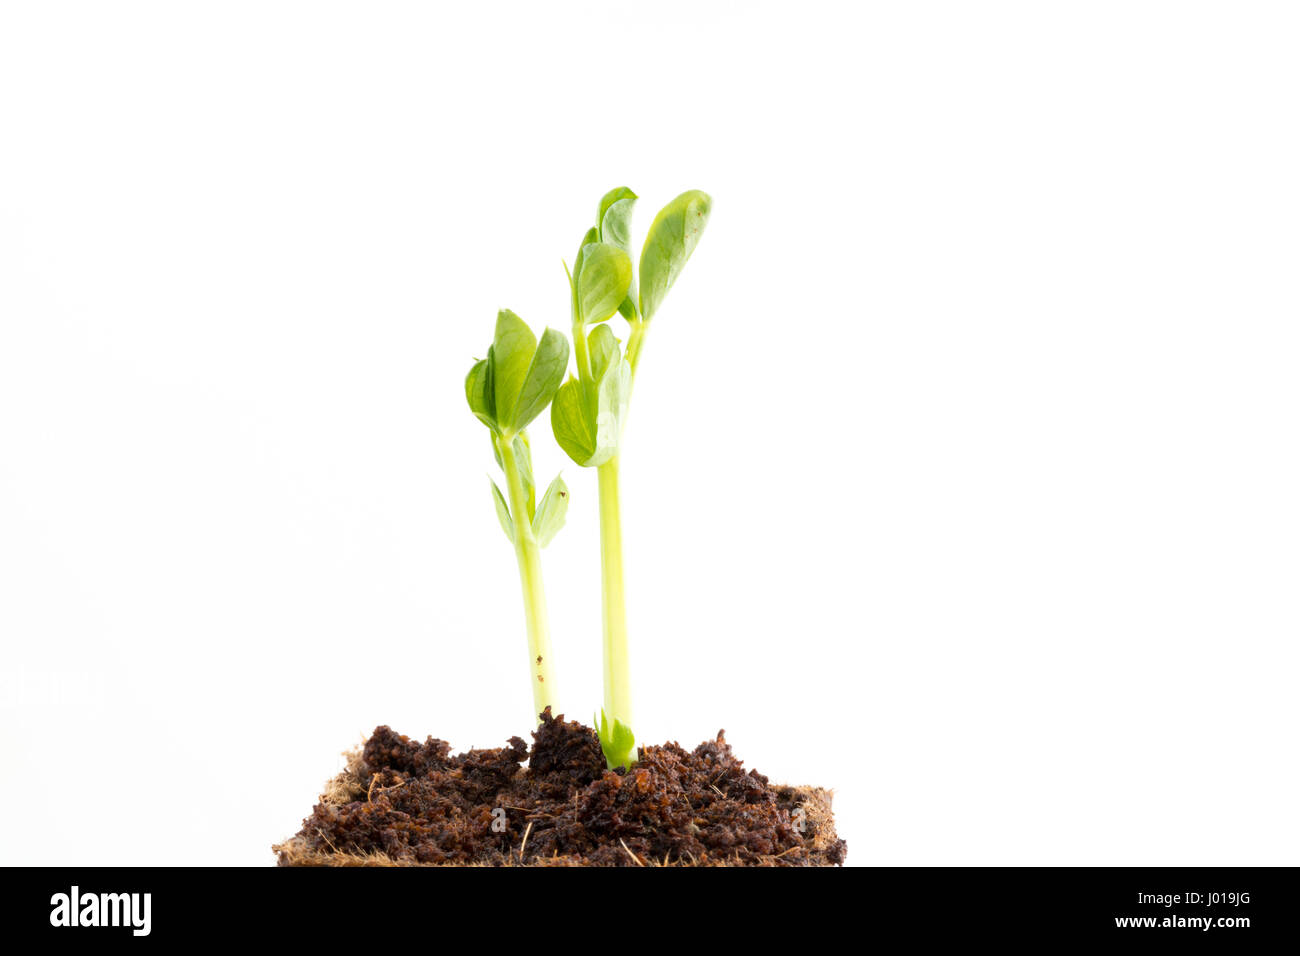 Young fresh seedlings of green pea in peat pot on white background Stock Photo